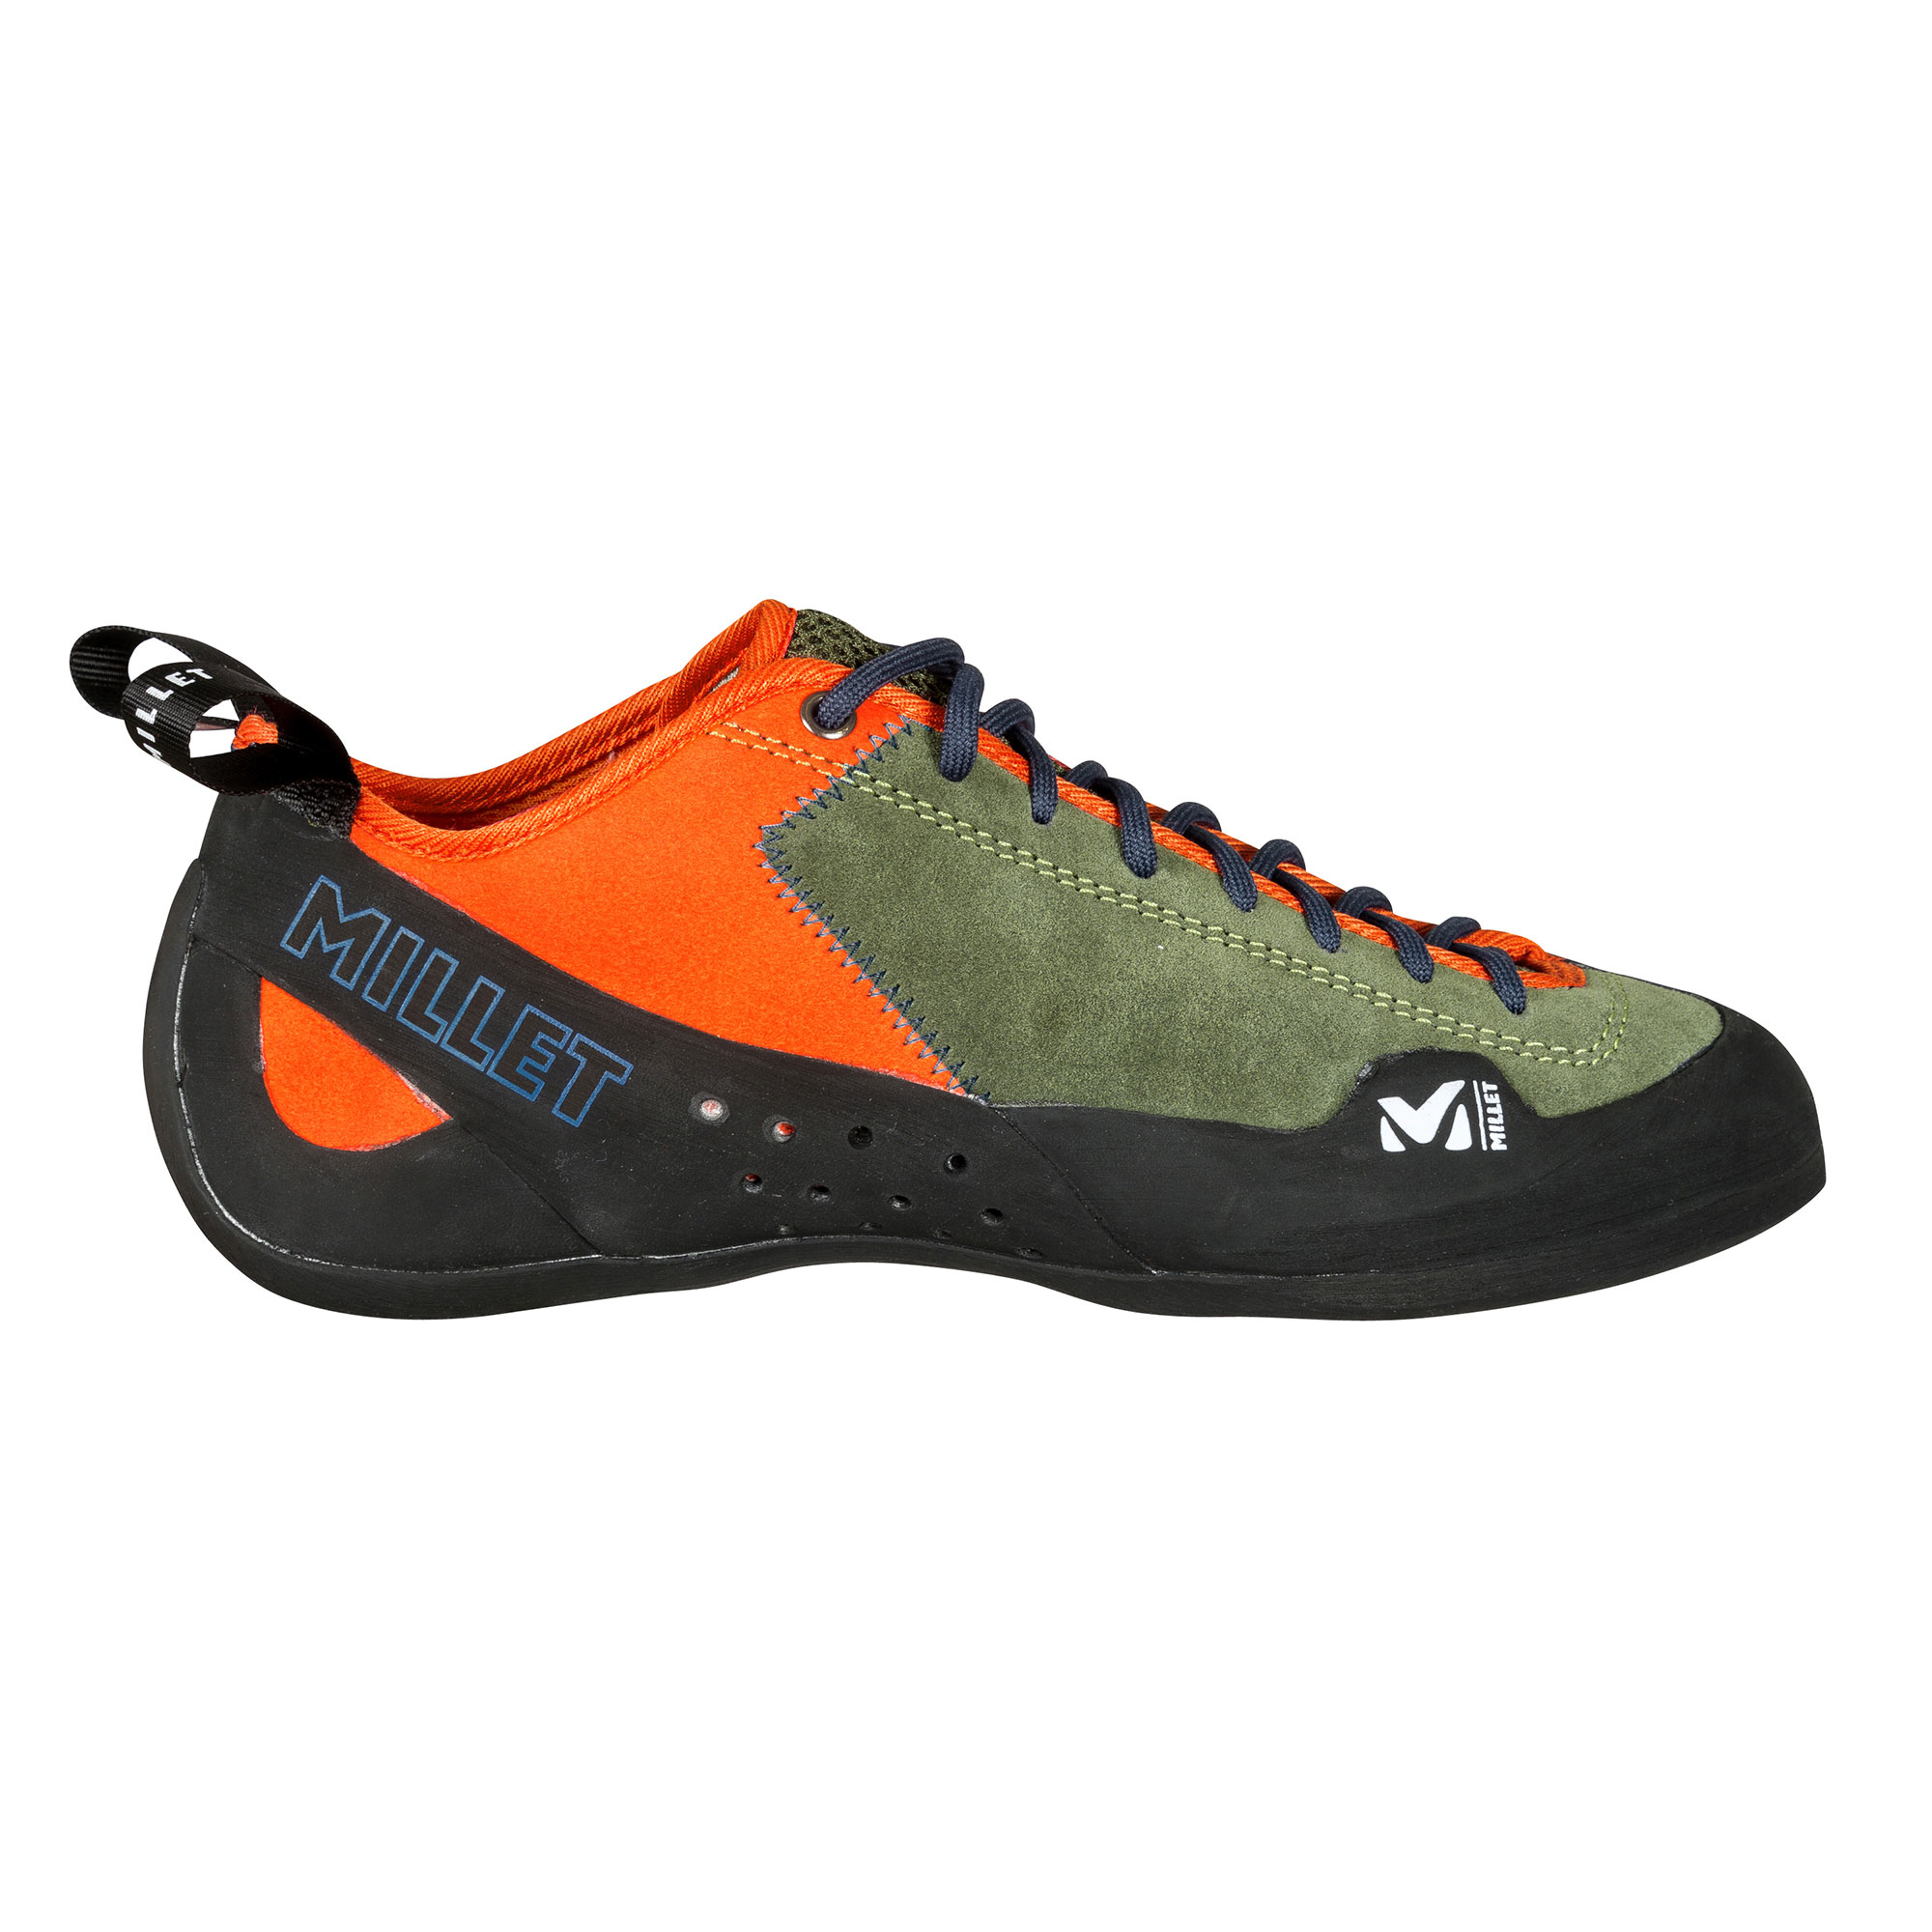 Millet Rock Up - Chaussons escalade | Hardloop